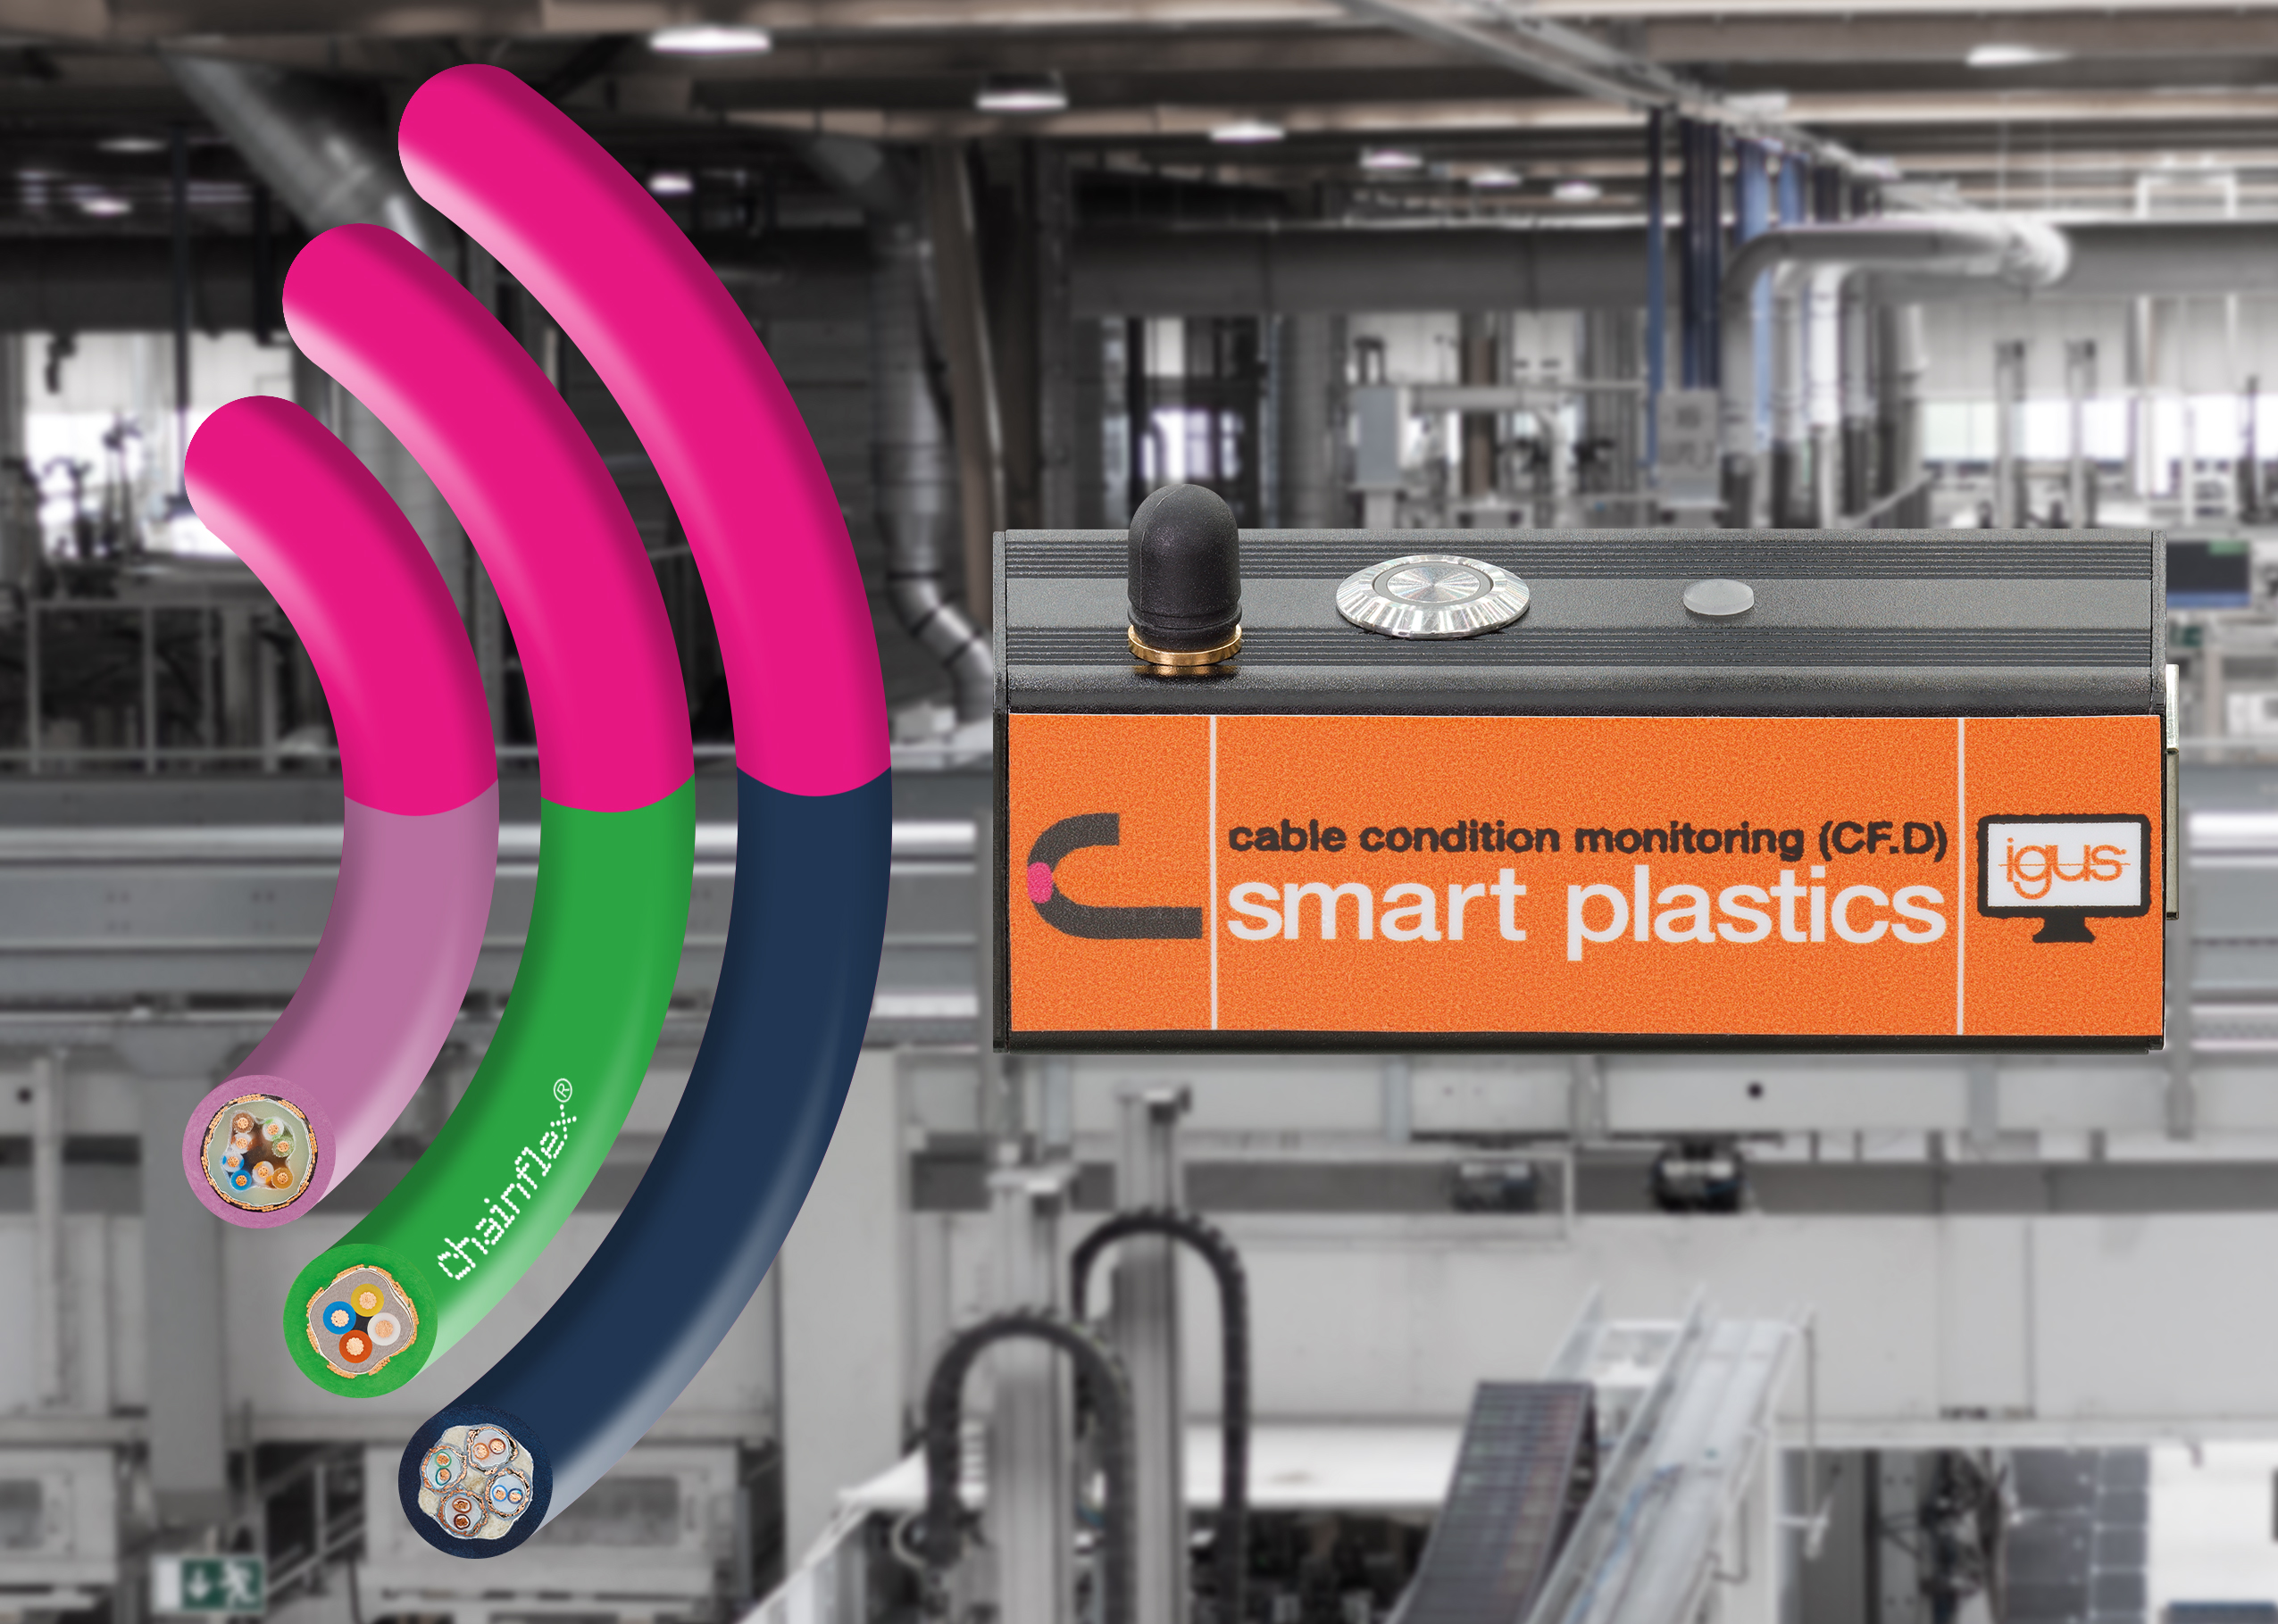 Small investment, big impact: Contactless monitoring of igus cables in e-chains